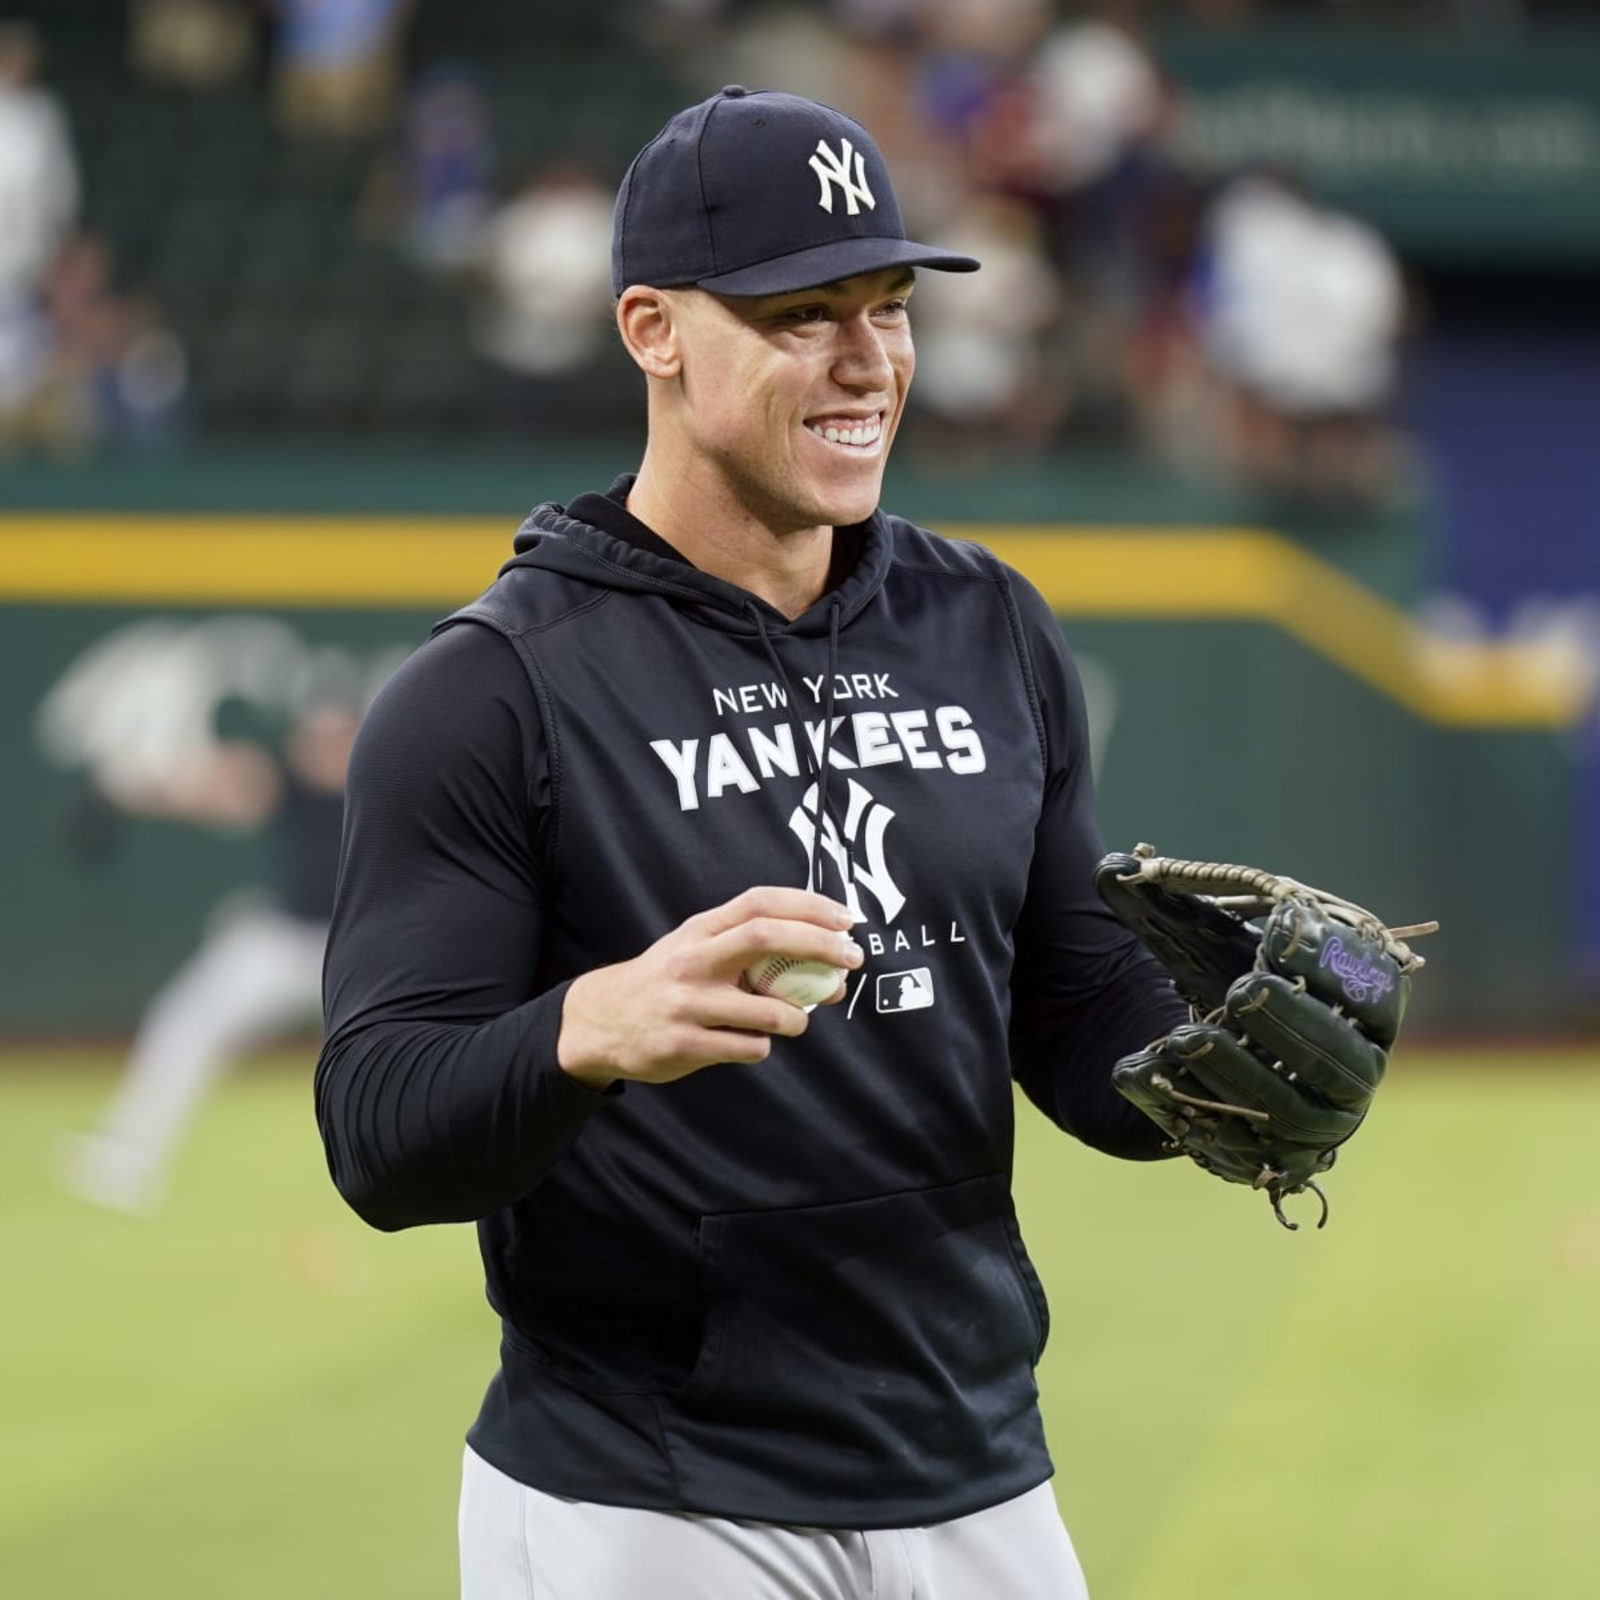 Red Sox pitchers aim to deny Aaron Judge in bid for history